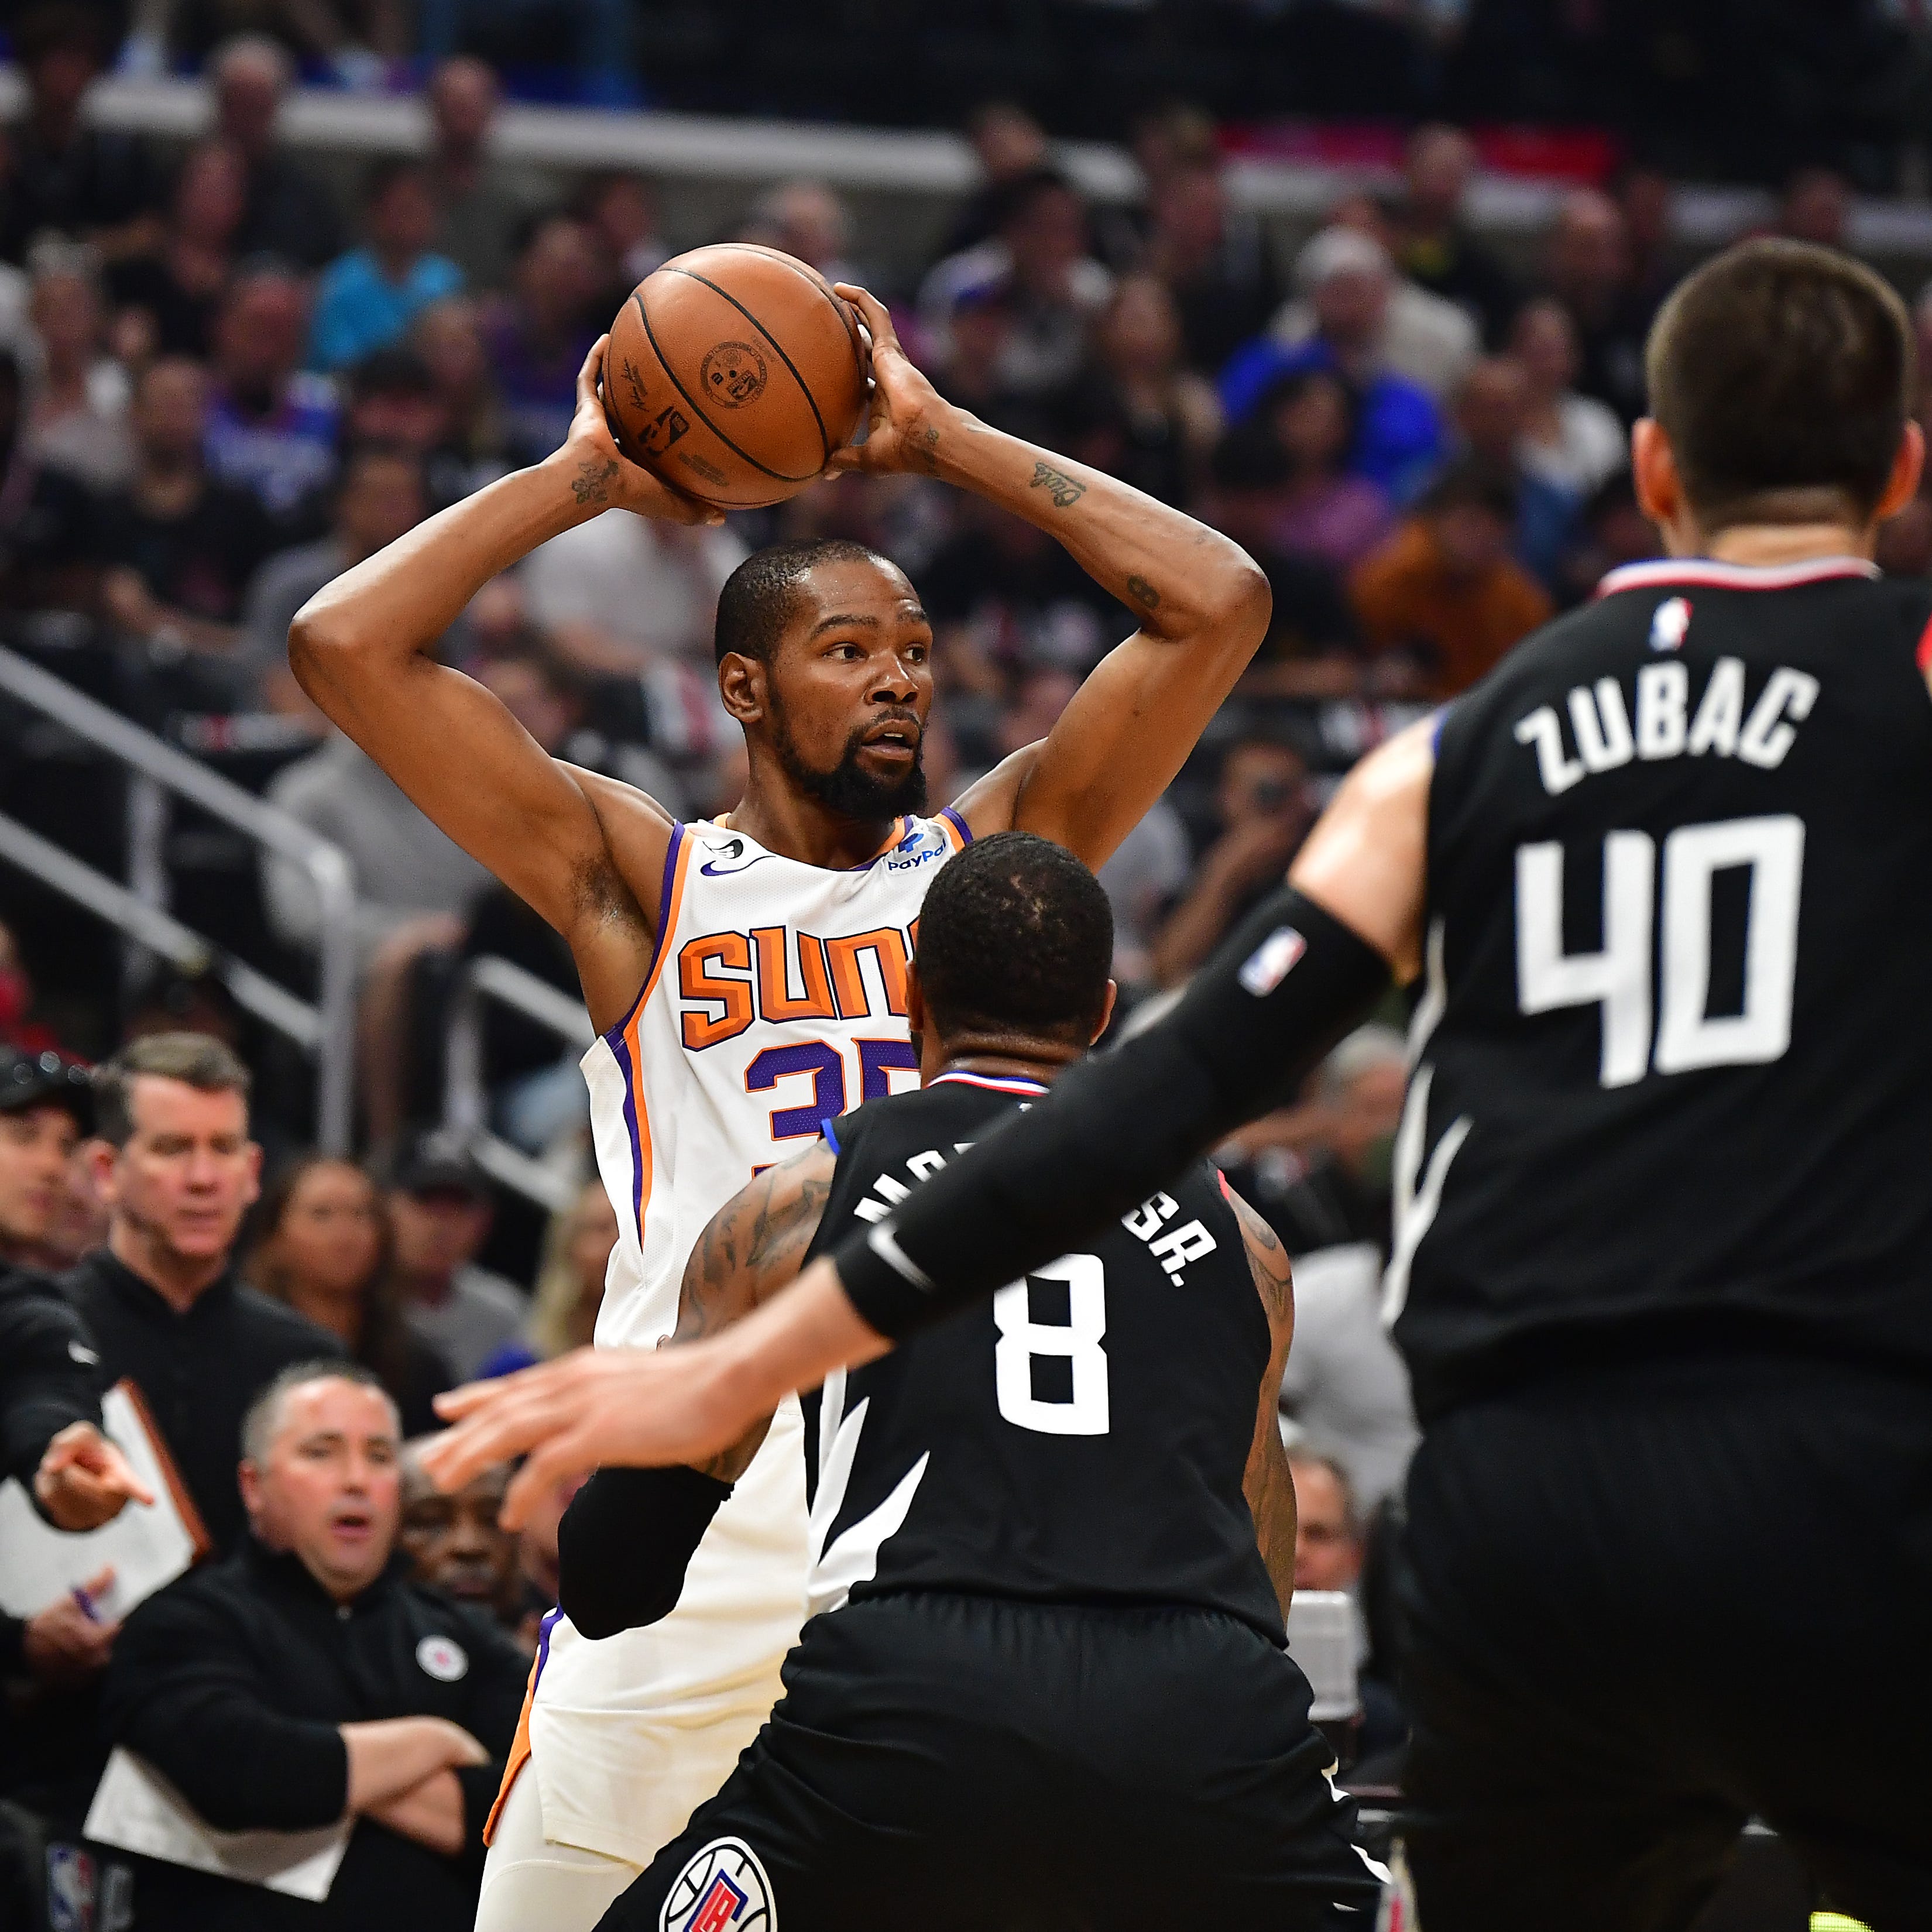 Apr 22, 2023; Los Angeles, California, USA; Phoenix Suns forward Kevin Durant (35) controls the ball against the Los Angeles Clippers during the first half in game four of the 2023 NBA playoffs at Crypto.com Arena. Mandatory Credit: Gary A. Vasquez-USA TODAY Sports